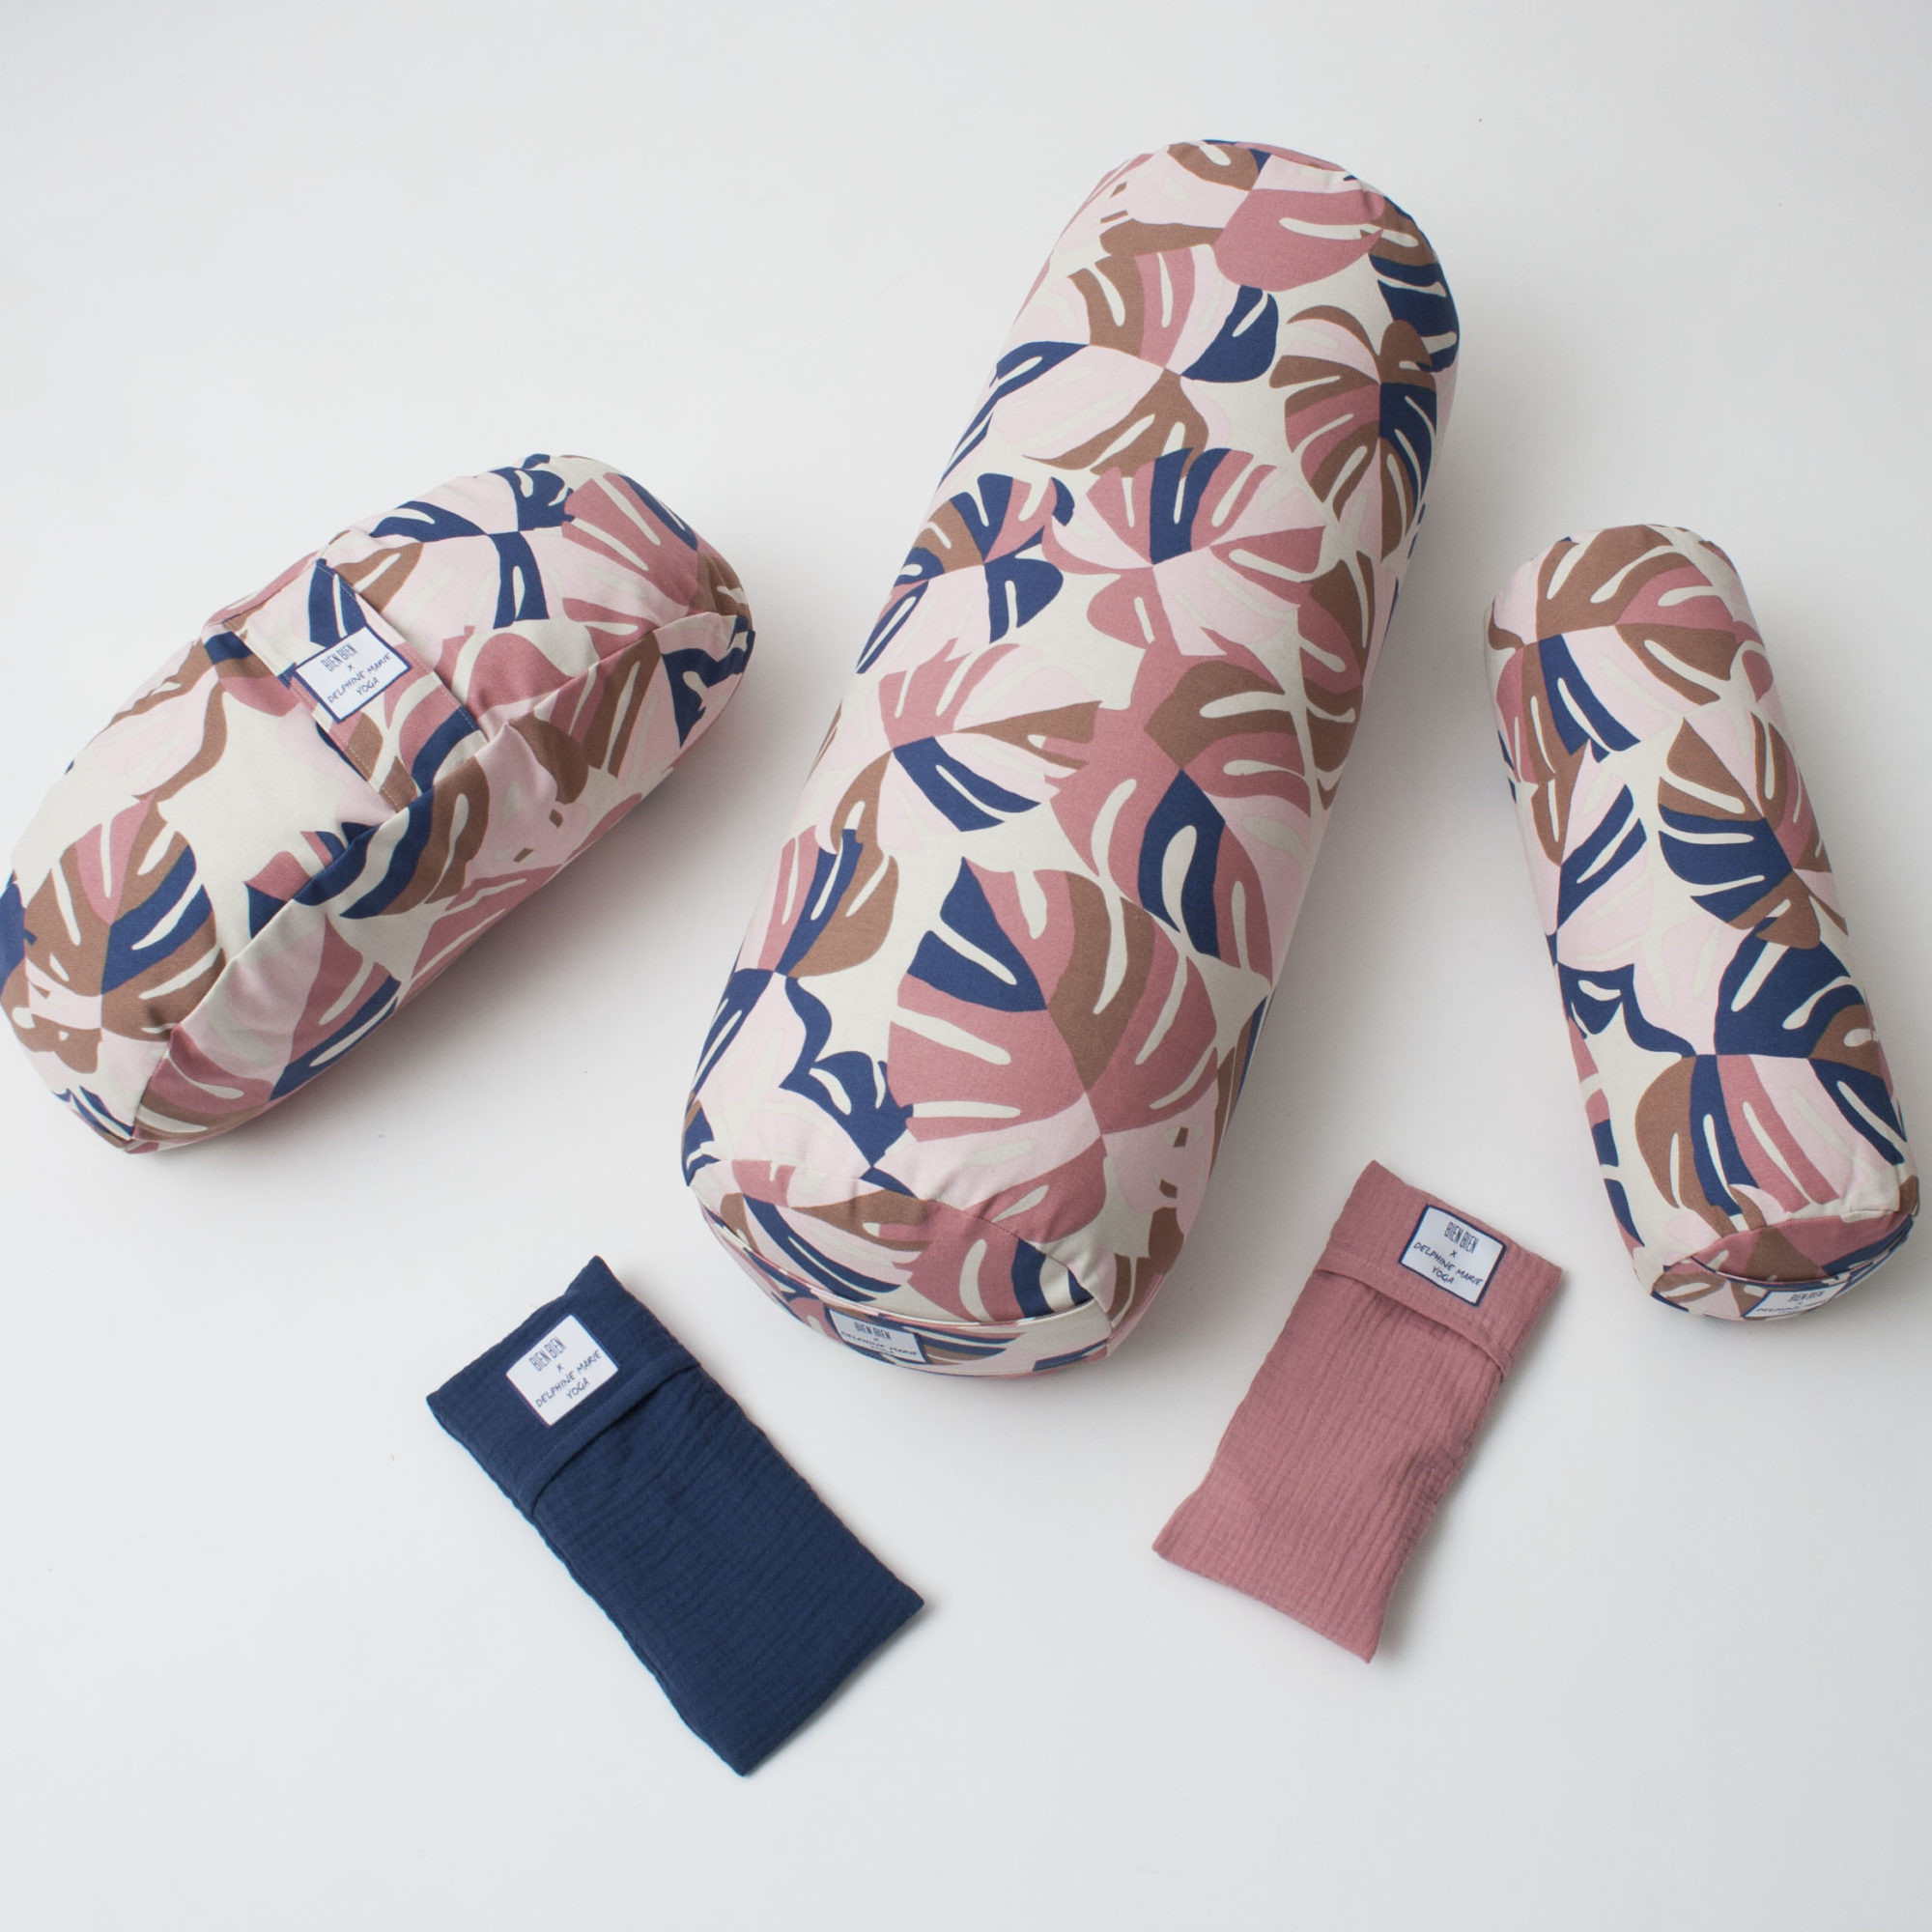 EYE PILLOW <br> COLLECTION <br> DELPHINE MARIE YOGA